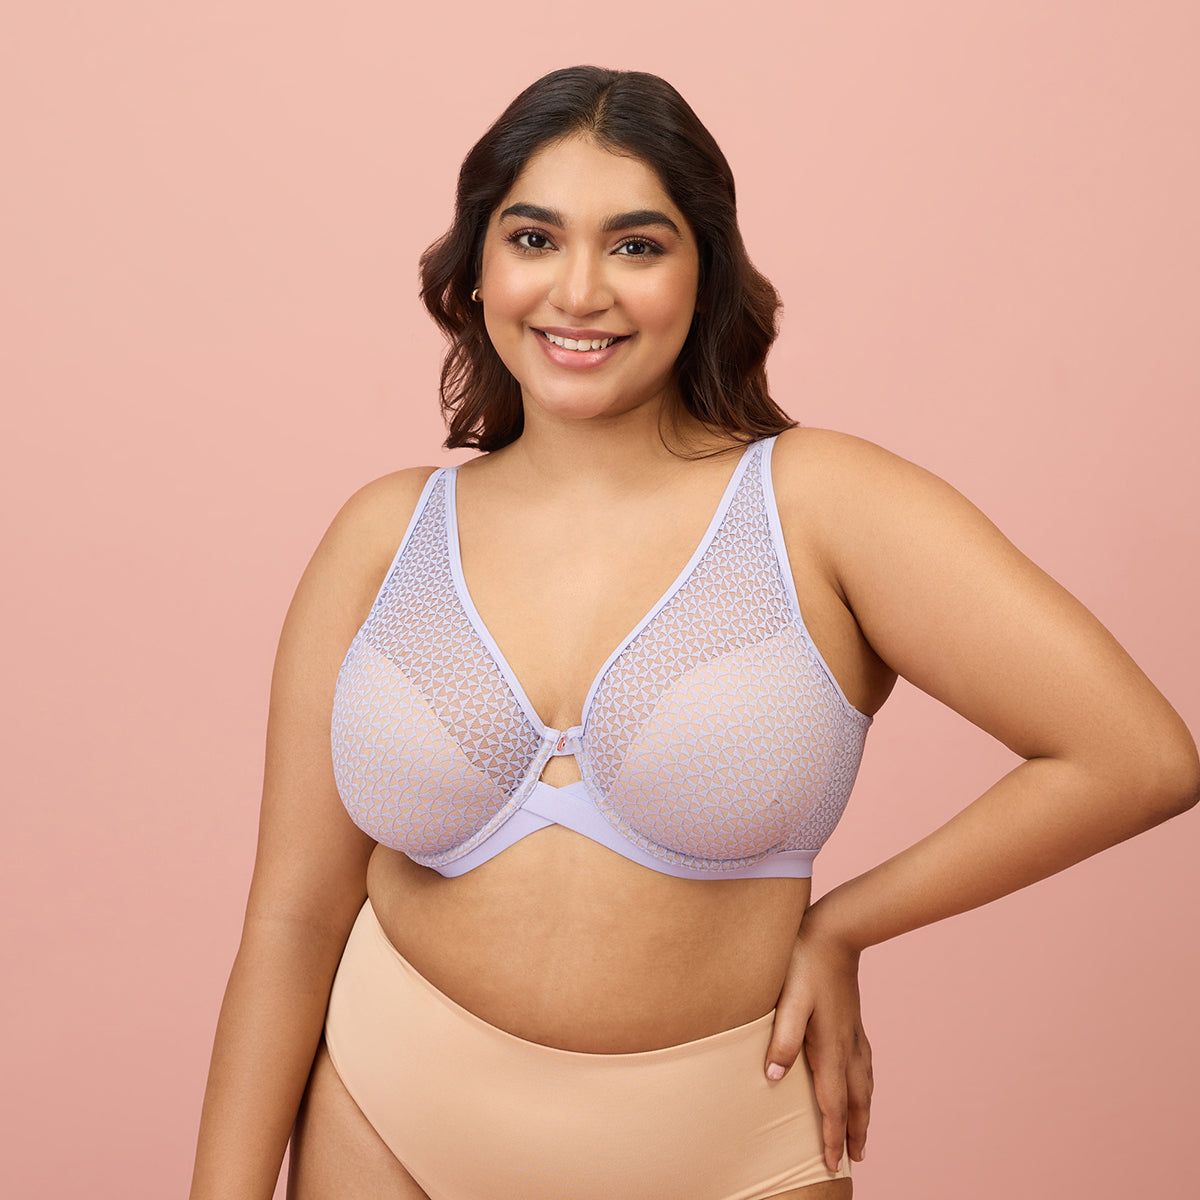 Nykd Textured Lace Support Bra - Non-Padded, Wired, Full Coverage - NYB140  Women T-Shirt Non Padded Bra - Buy Nykd Textured Lace Support Bra -  Non-Padded, Wired, Full Coverage - NYB140 Women